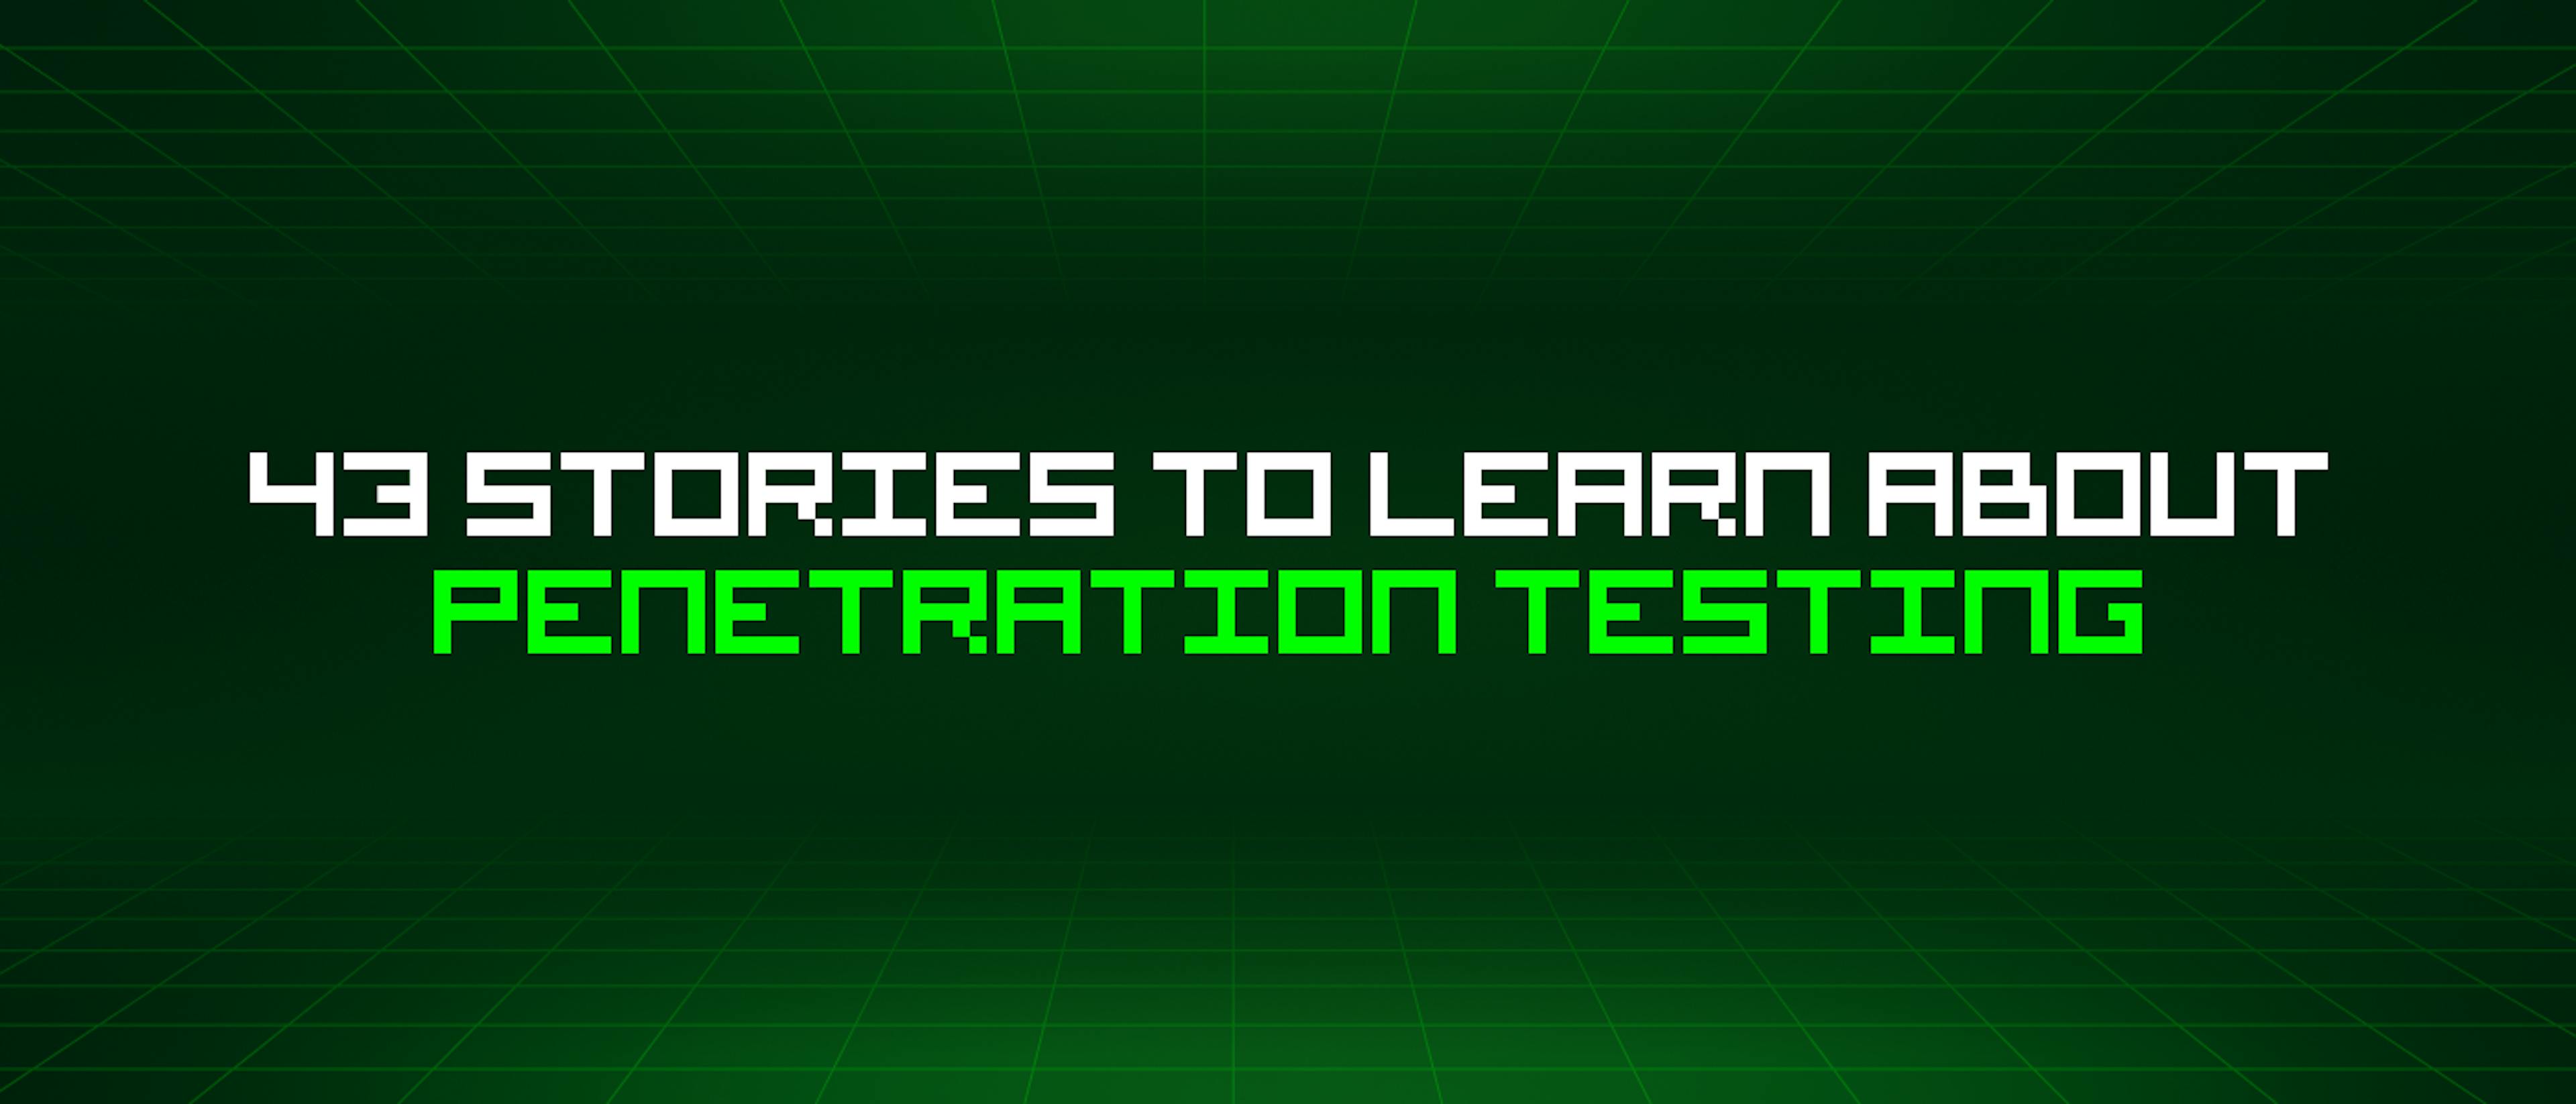 featured image - 43 Stories To Learn About Penetration Testing